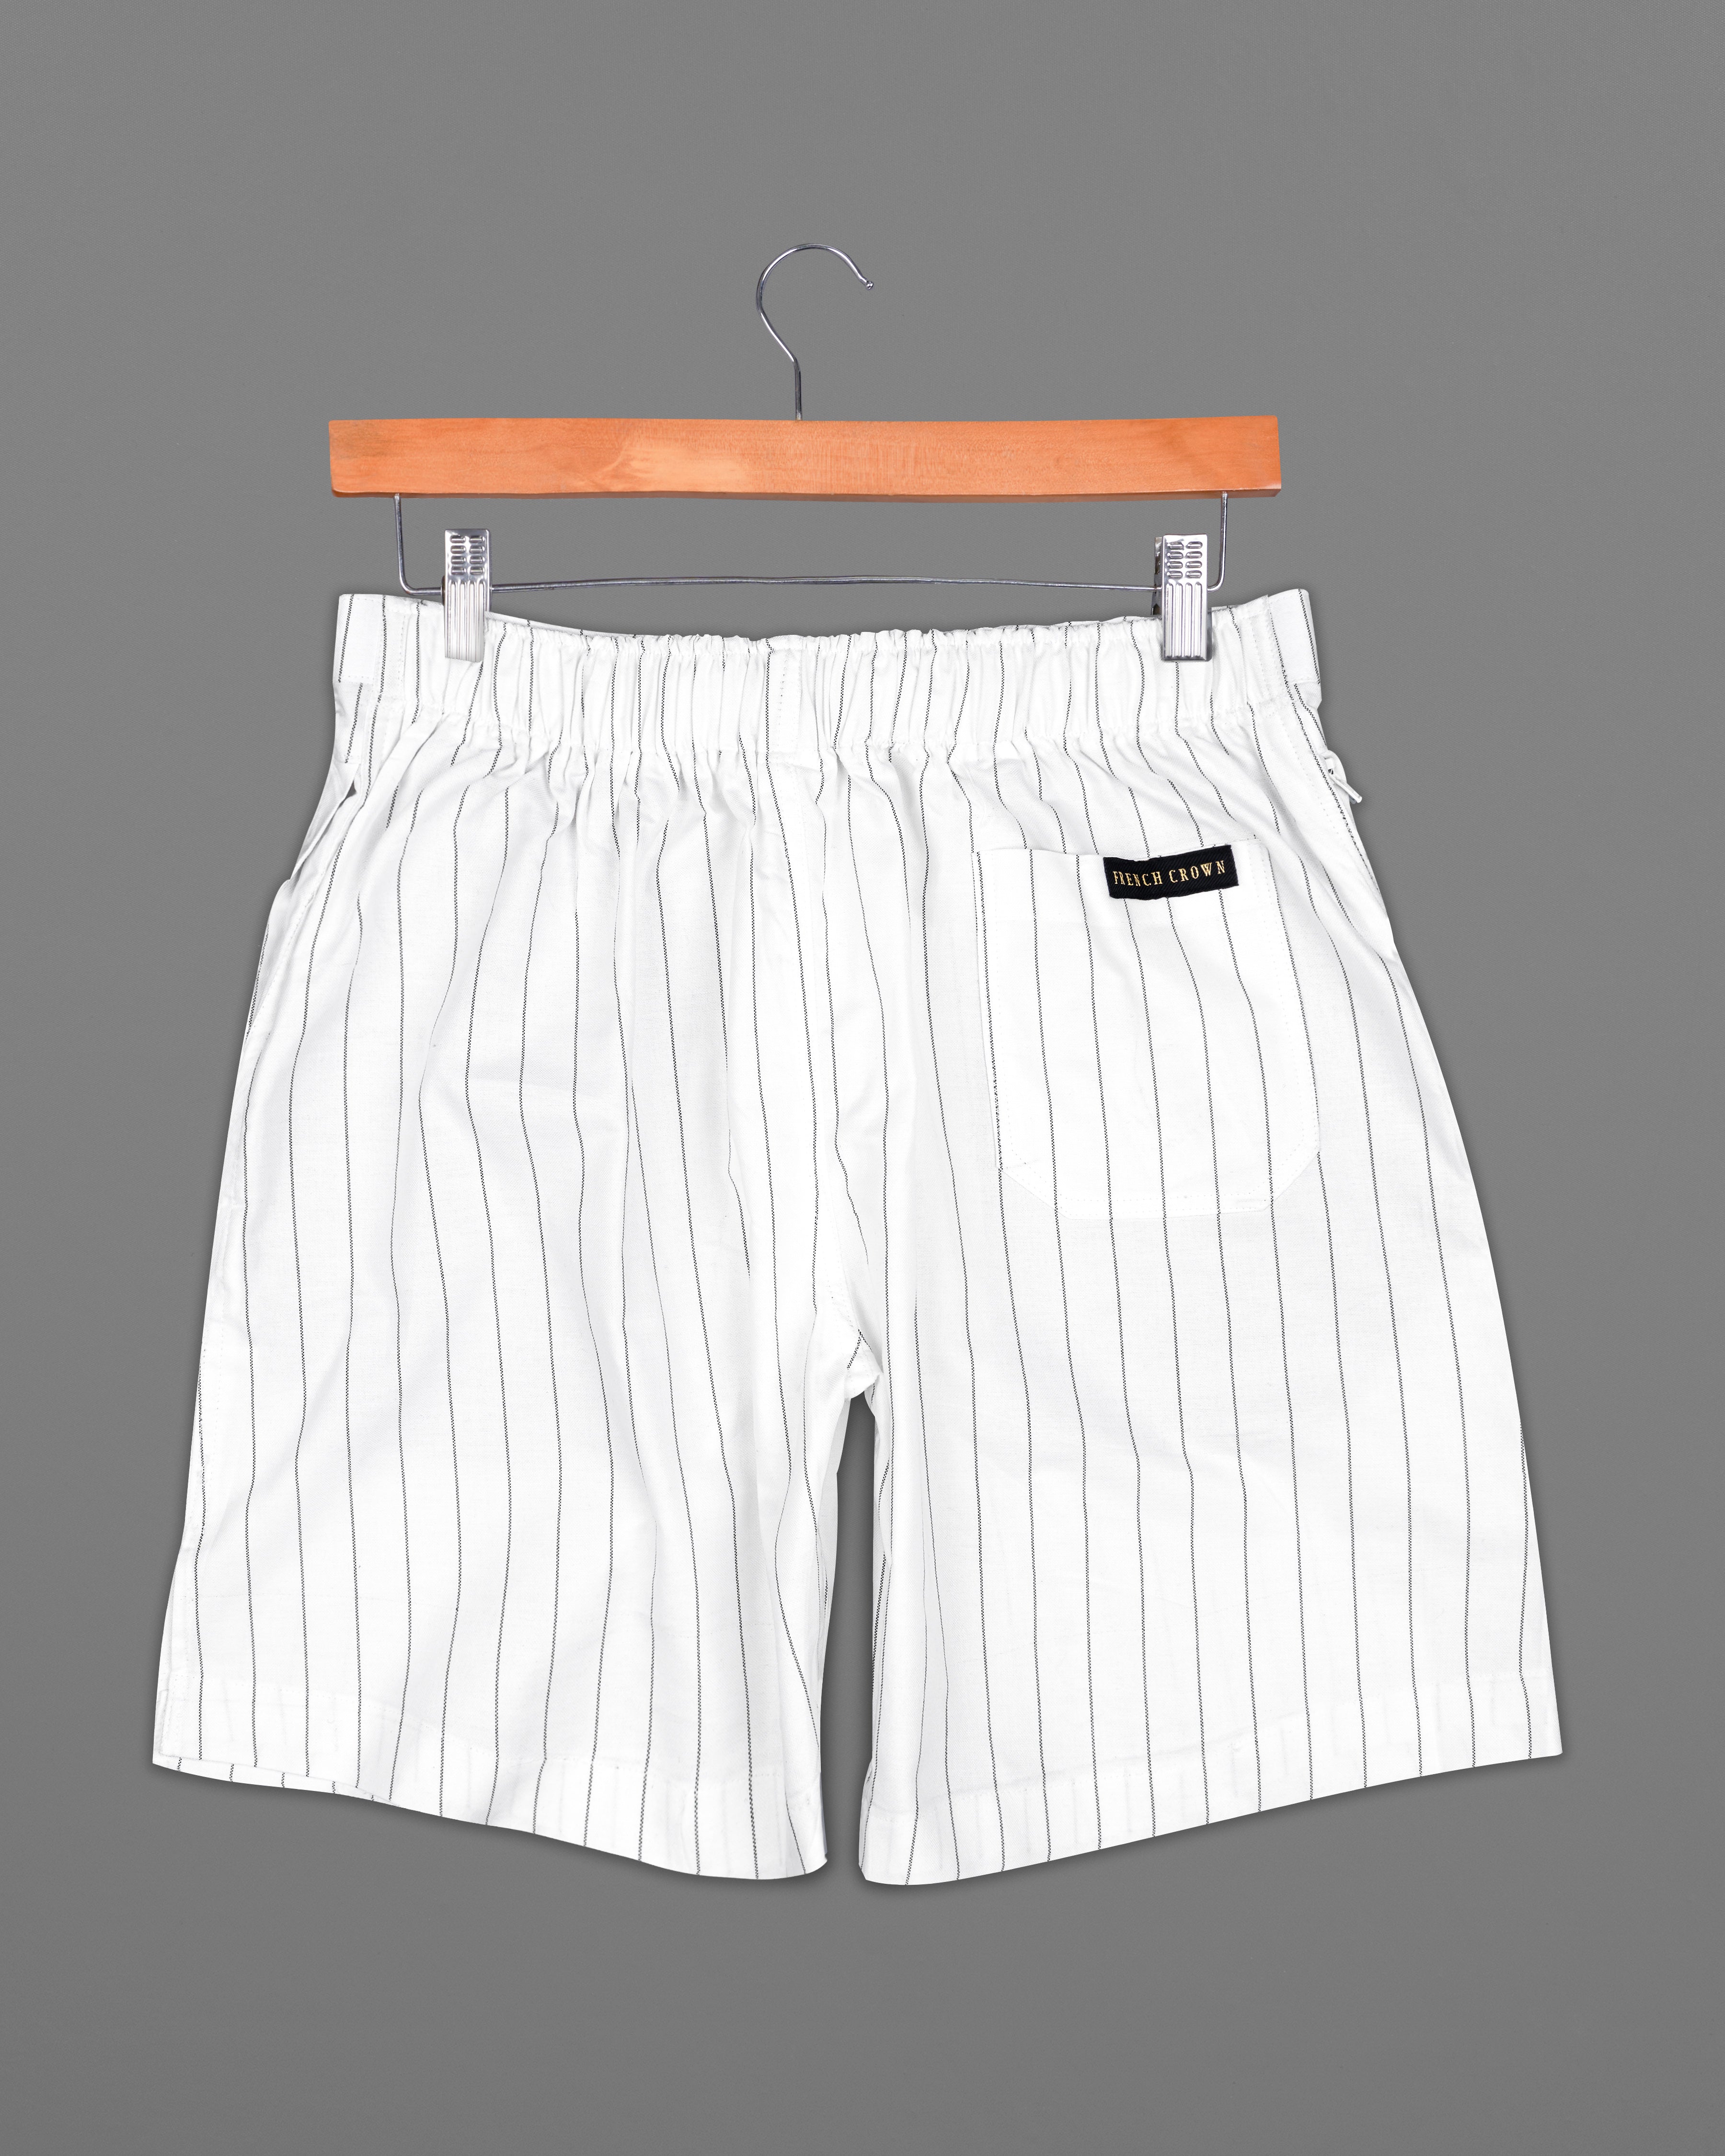 Bright White Striped Royal Oxford Co-ords Sets 9698-CC-BLK-SS-SR209-P584-38, 9698-CC-BLK-SS-SR209-P584-39, 9698-CC-BLK-SS-SR209-P584-40, 9698-CC-BLK-SS-SR209-P584-42, 9698-CC-BLK-SS-SR209-P584-44, 9698-CC-BLK-SS-SR209-P584-46, 9698-CC-BLK-SS-SR209-P584-48, 9698-CC-BLK-SS-SR209-P584-50, 9698-CC-BLK-SS-SR209-P584-52